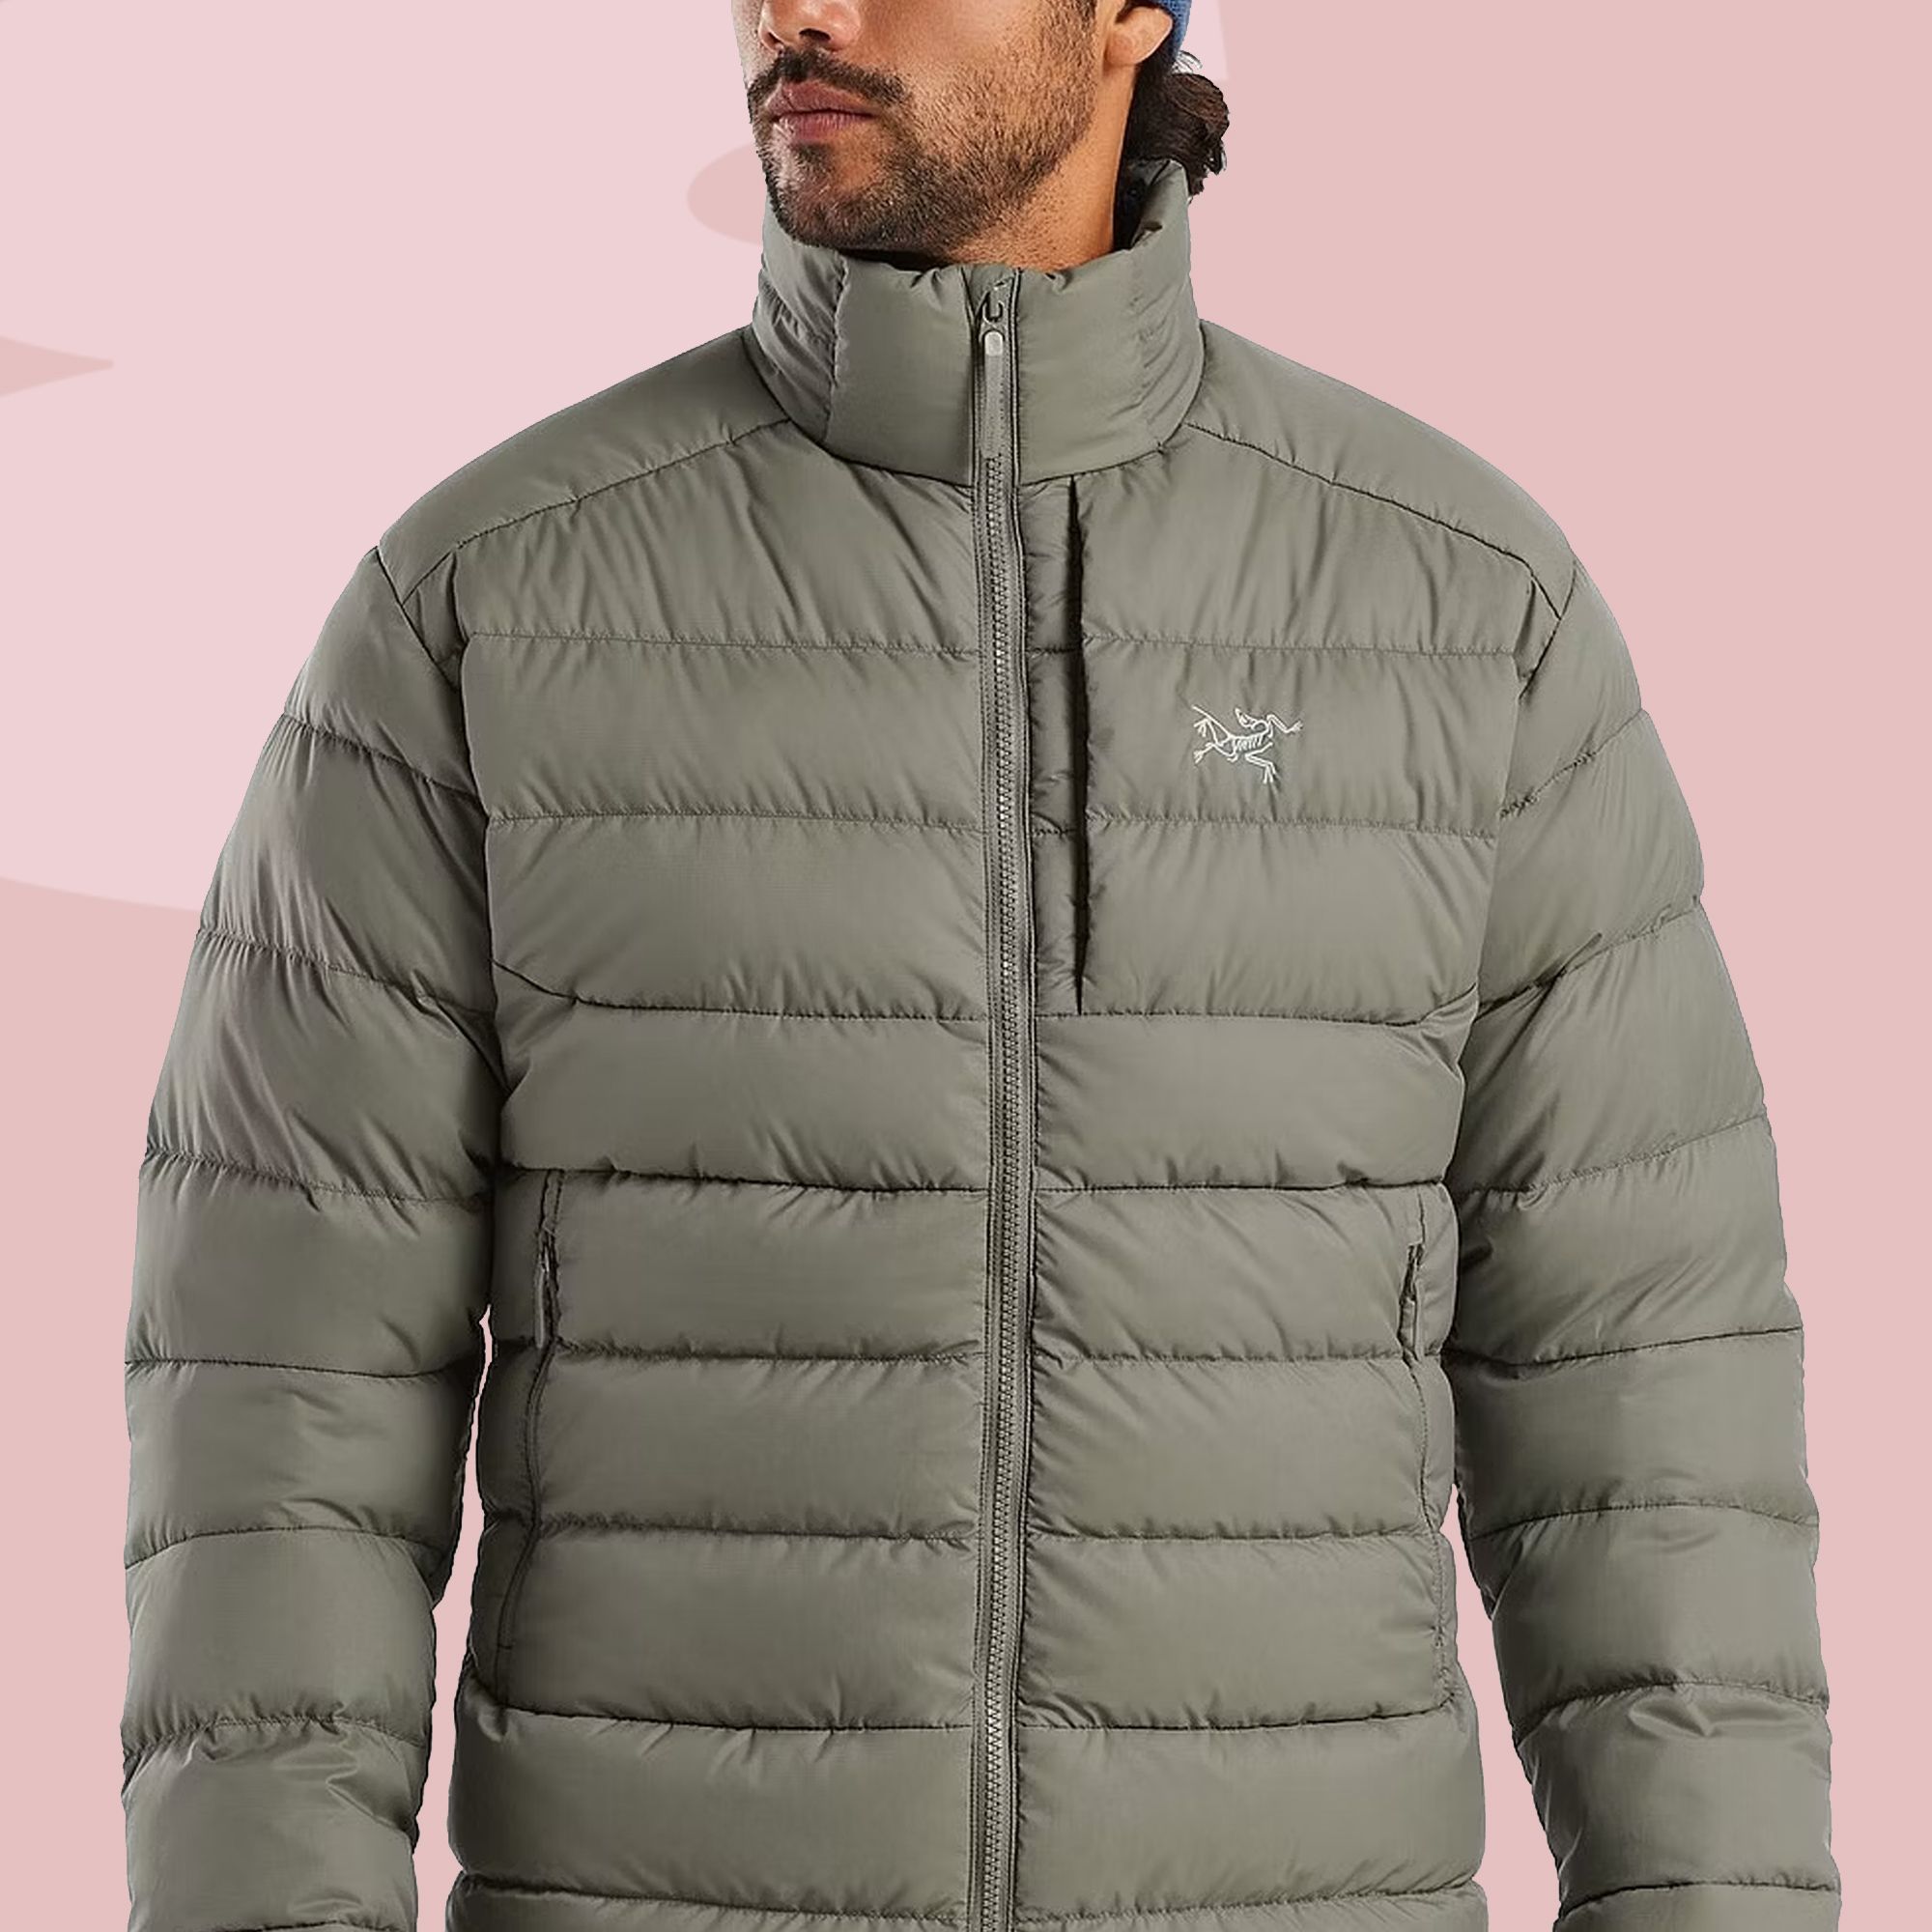 Our Favorite Arc'teryx Down Jacket Is 30% Off For Cyber Monday